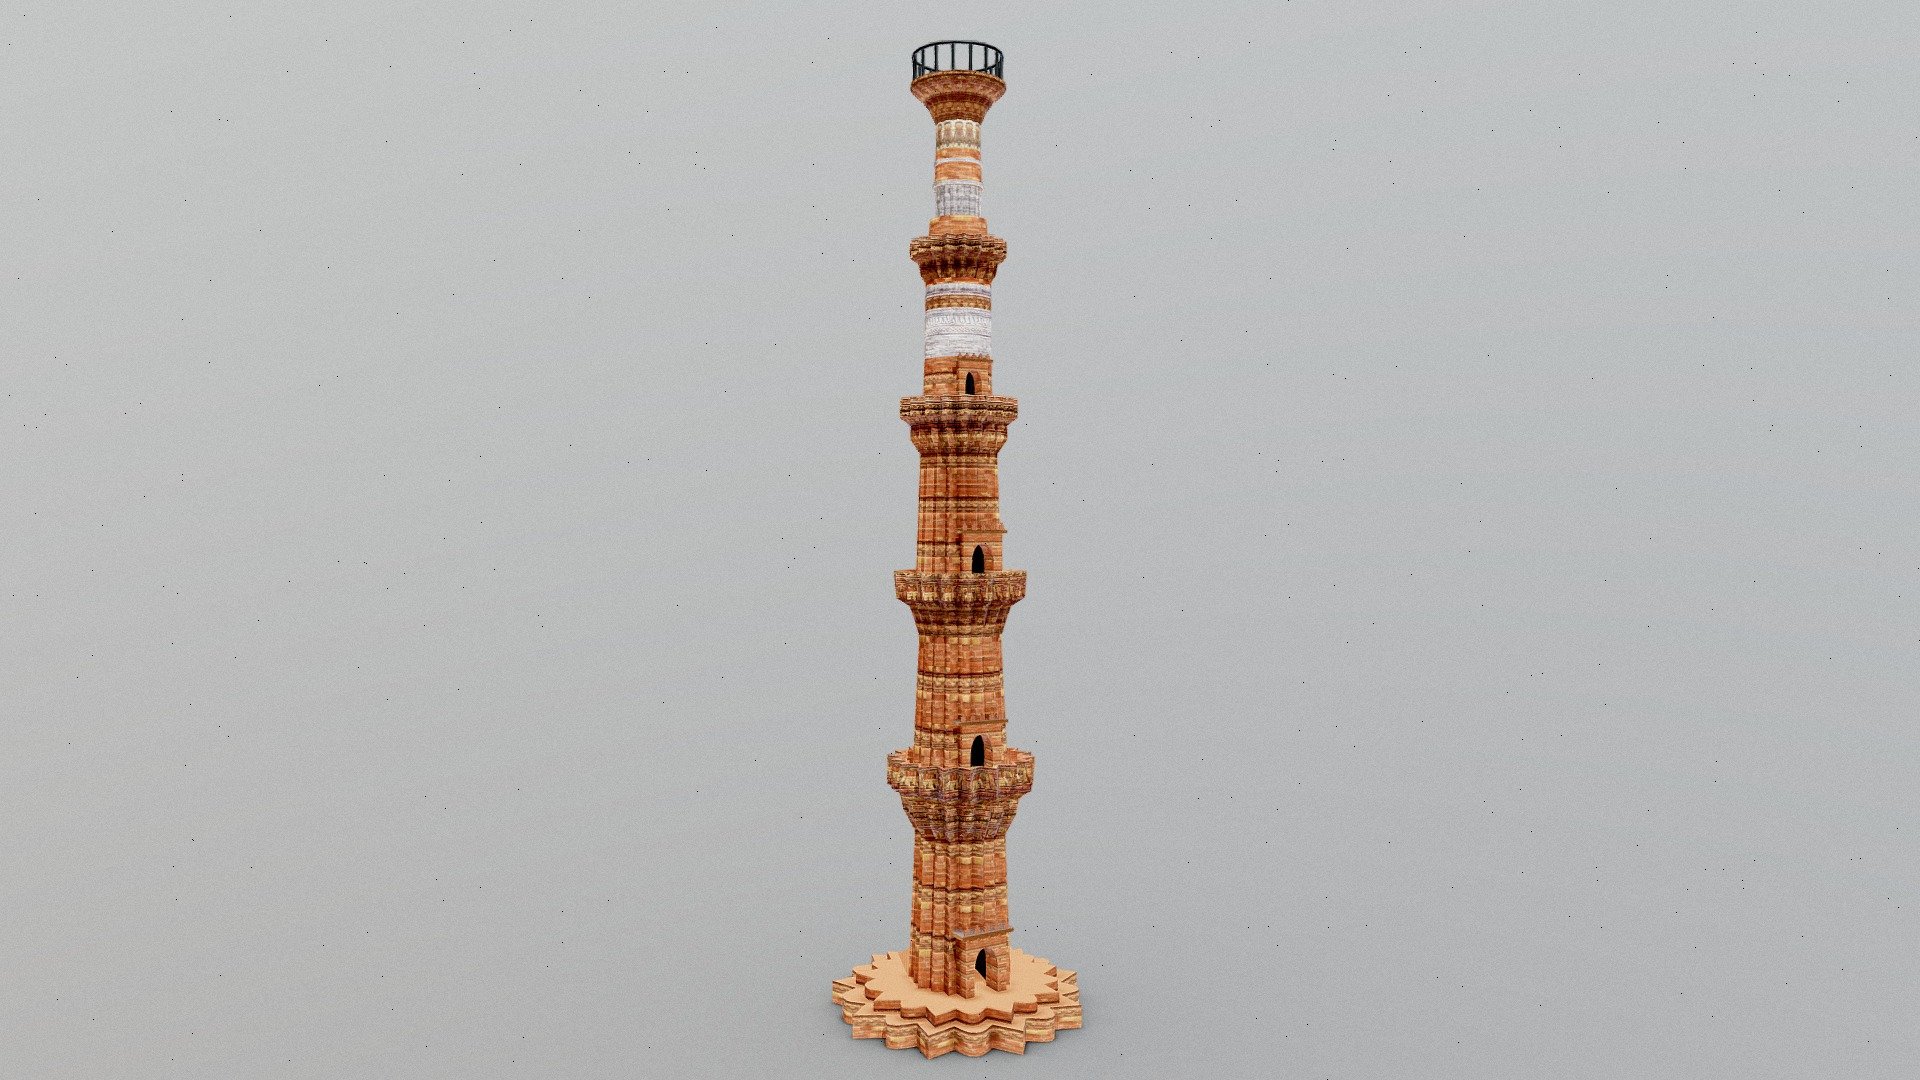 Qutub Minar / Vishnu Stamb



Softwares used : Blender, Shoebox, Photoshop CC

Lowpoly Model and Mid Quality Texture

If any Queries, more information and any Modifications feel free to Contact me :

Email : anishdombale848@gmail.com

WhatsApp : 8459822600 - Qutub Minar - Buy Royalty Free 3D model by AnishRoyalinc 3d model